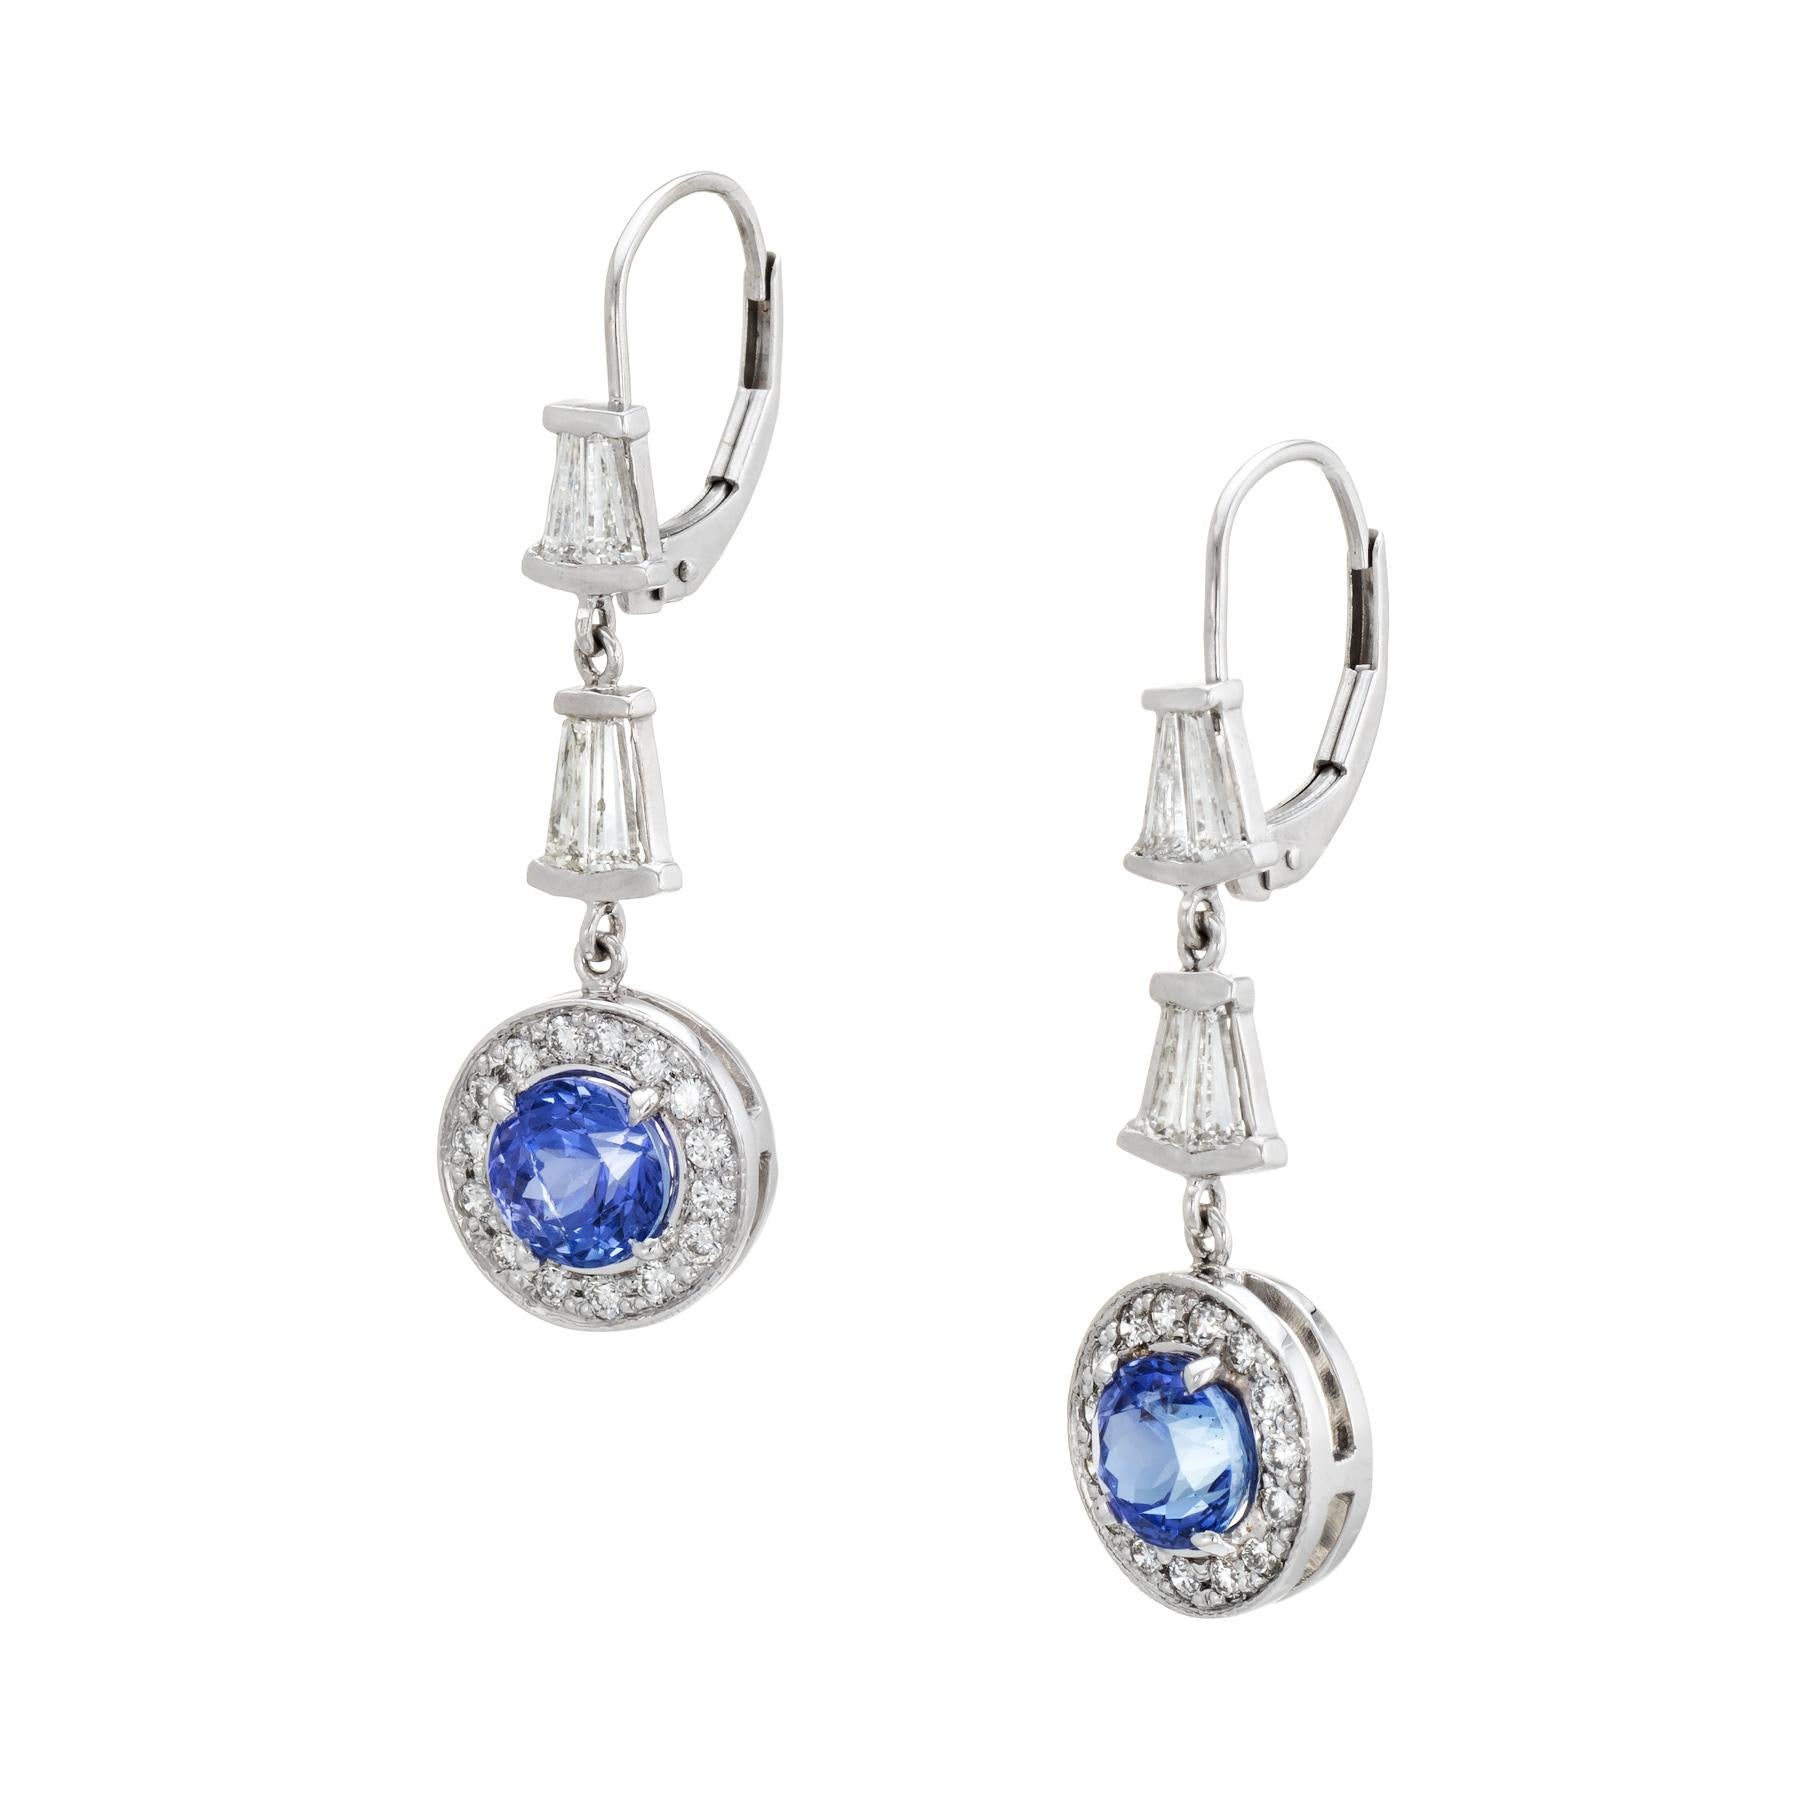 Elegant pair of vintage diamond & tanzanite earrings, crafted in 14k white gold. 

Round brilliant and baguette cut diamonds total an estimated 1.10 carats (estimated at H-I color and SI1-2 clarity). The faceted round cut tanzanite each measures 6mm